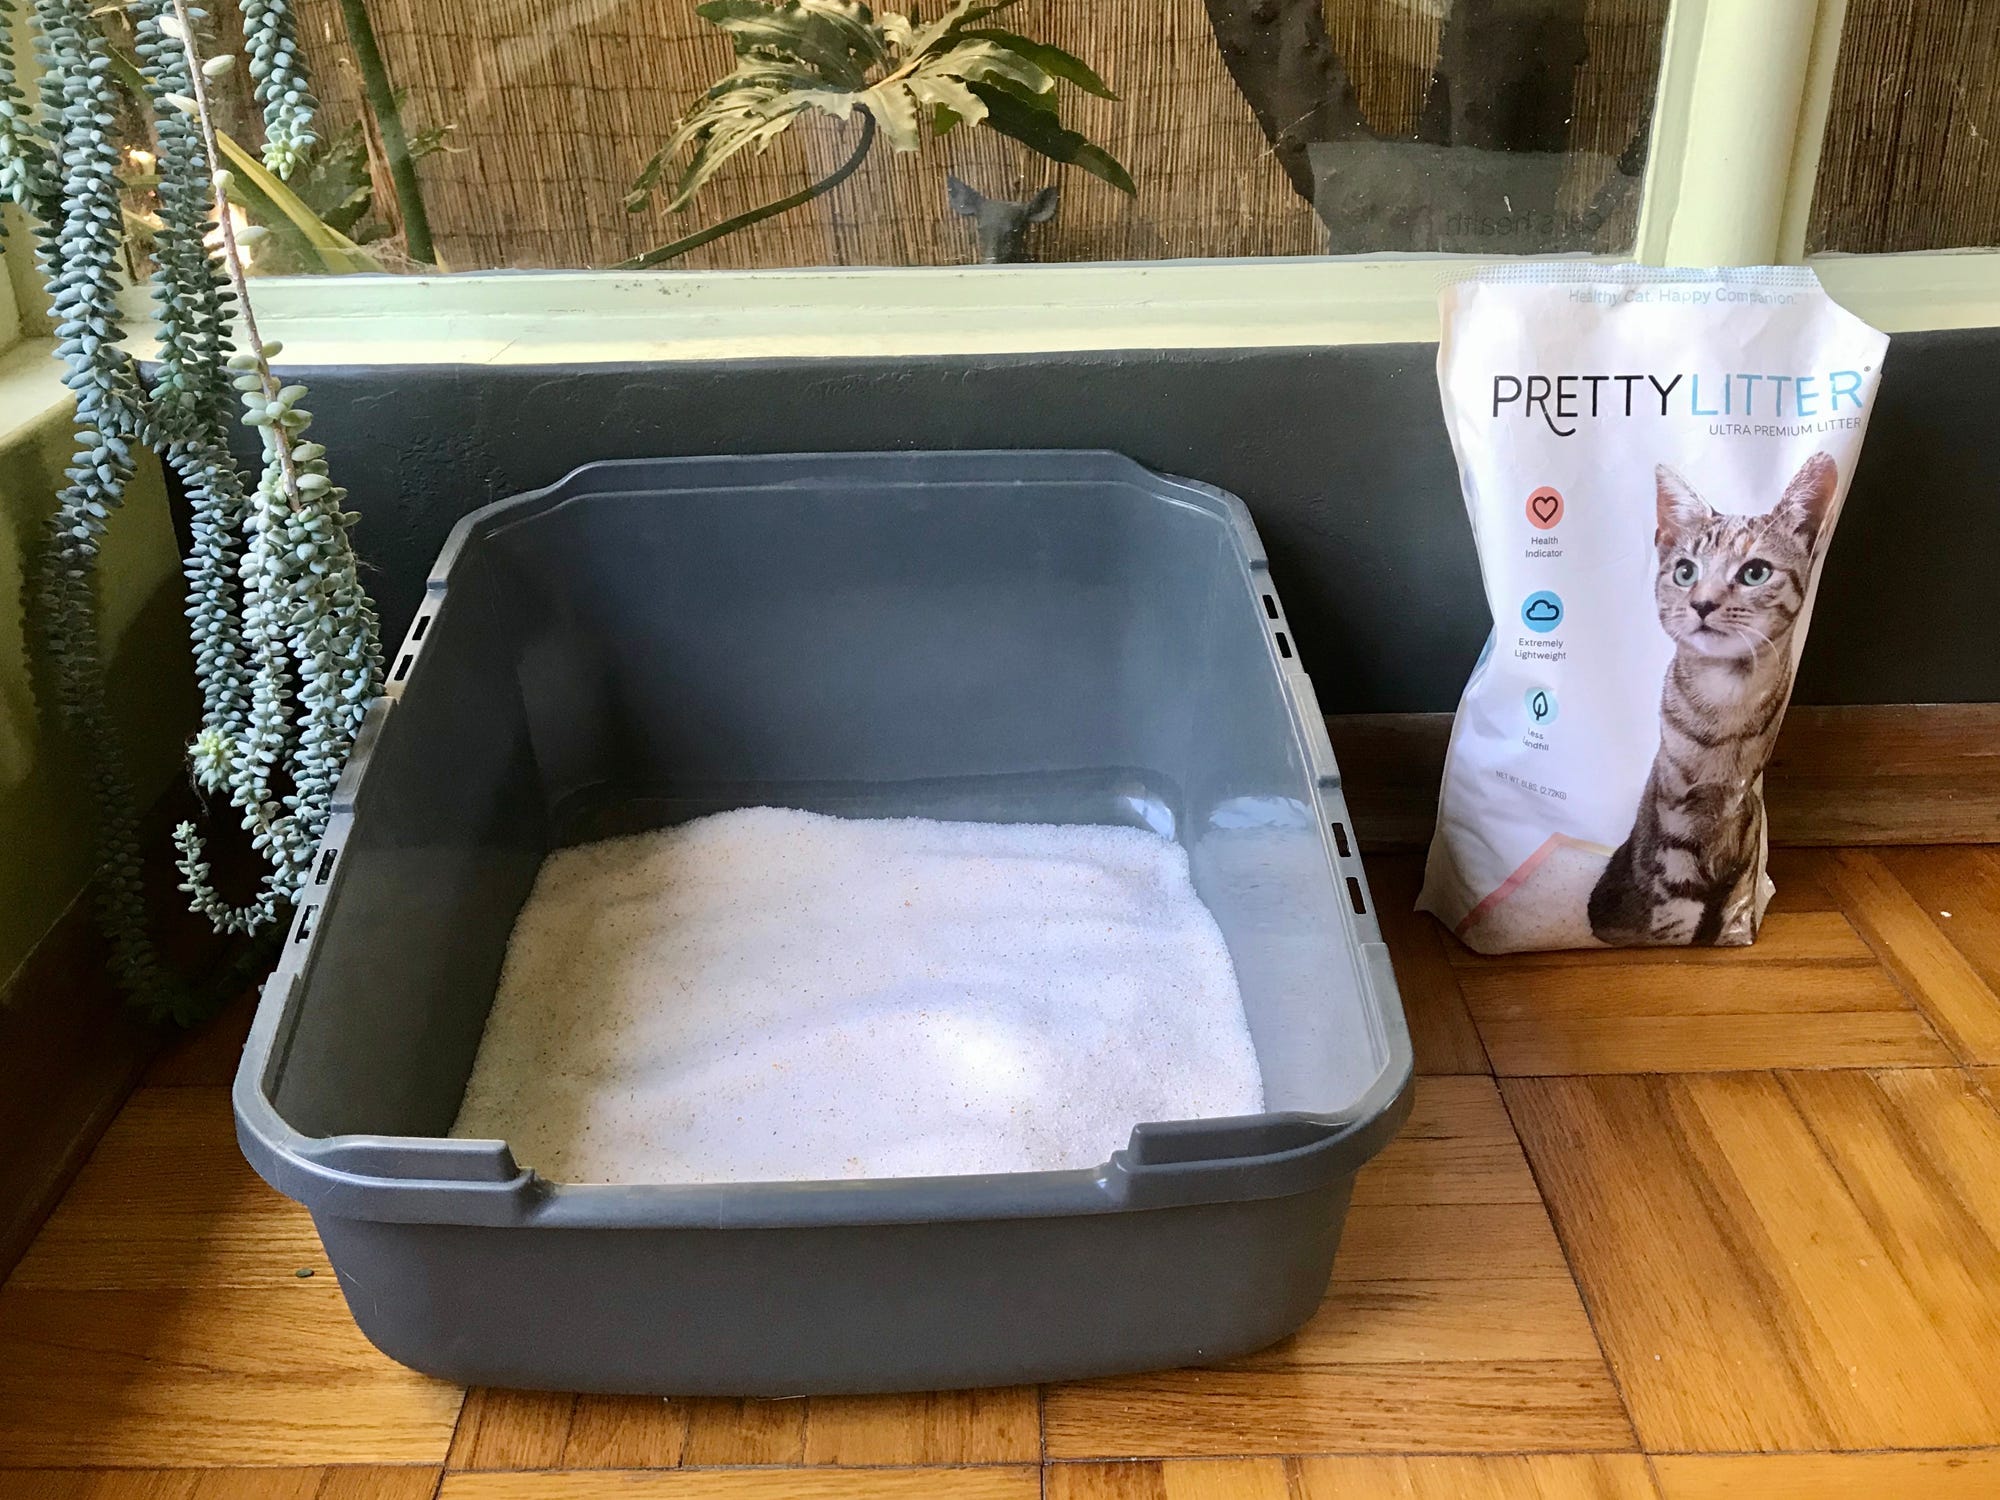 a litter box filled with pretty litter and the bad beside it